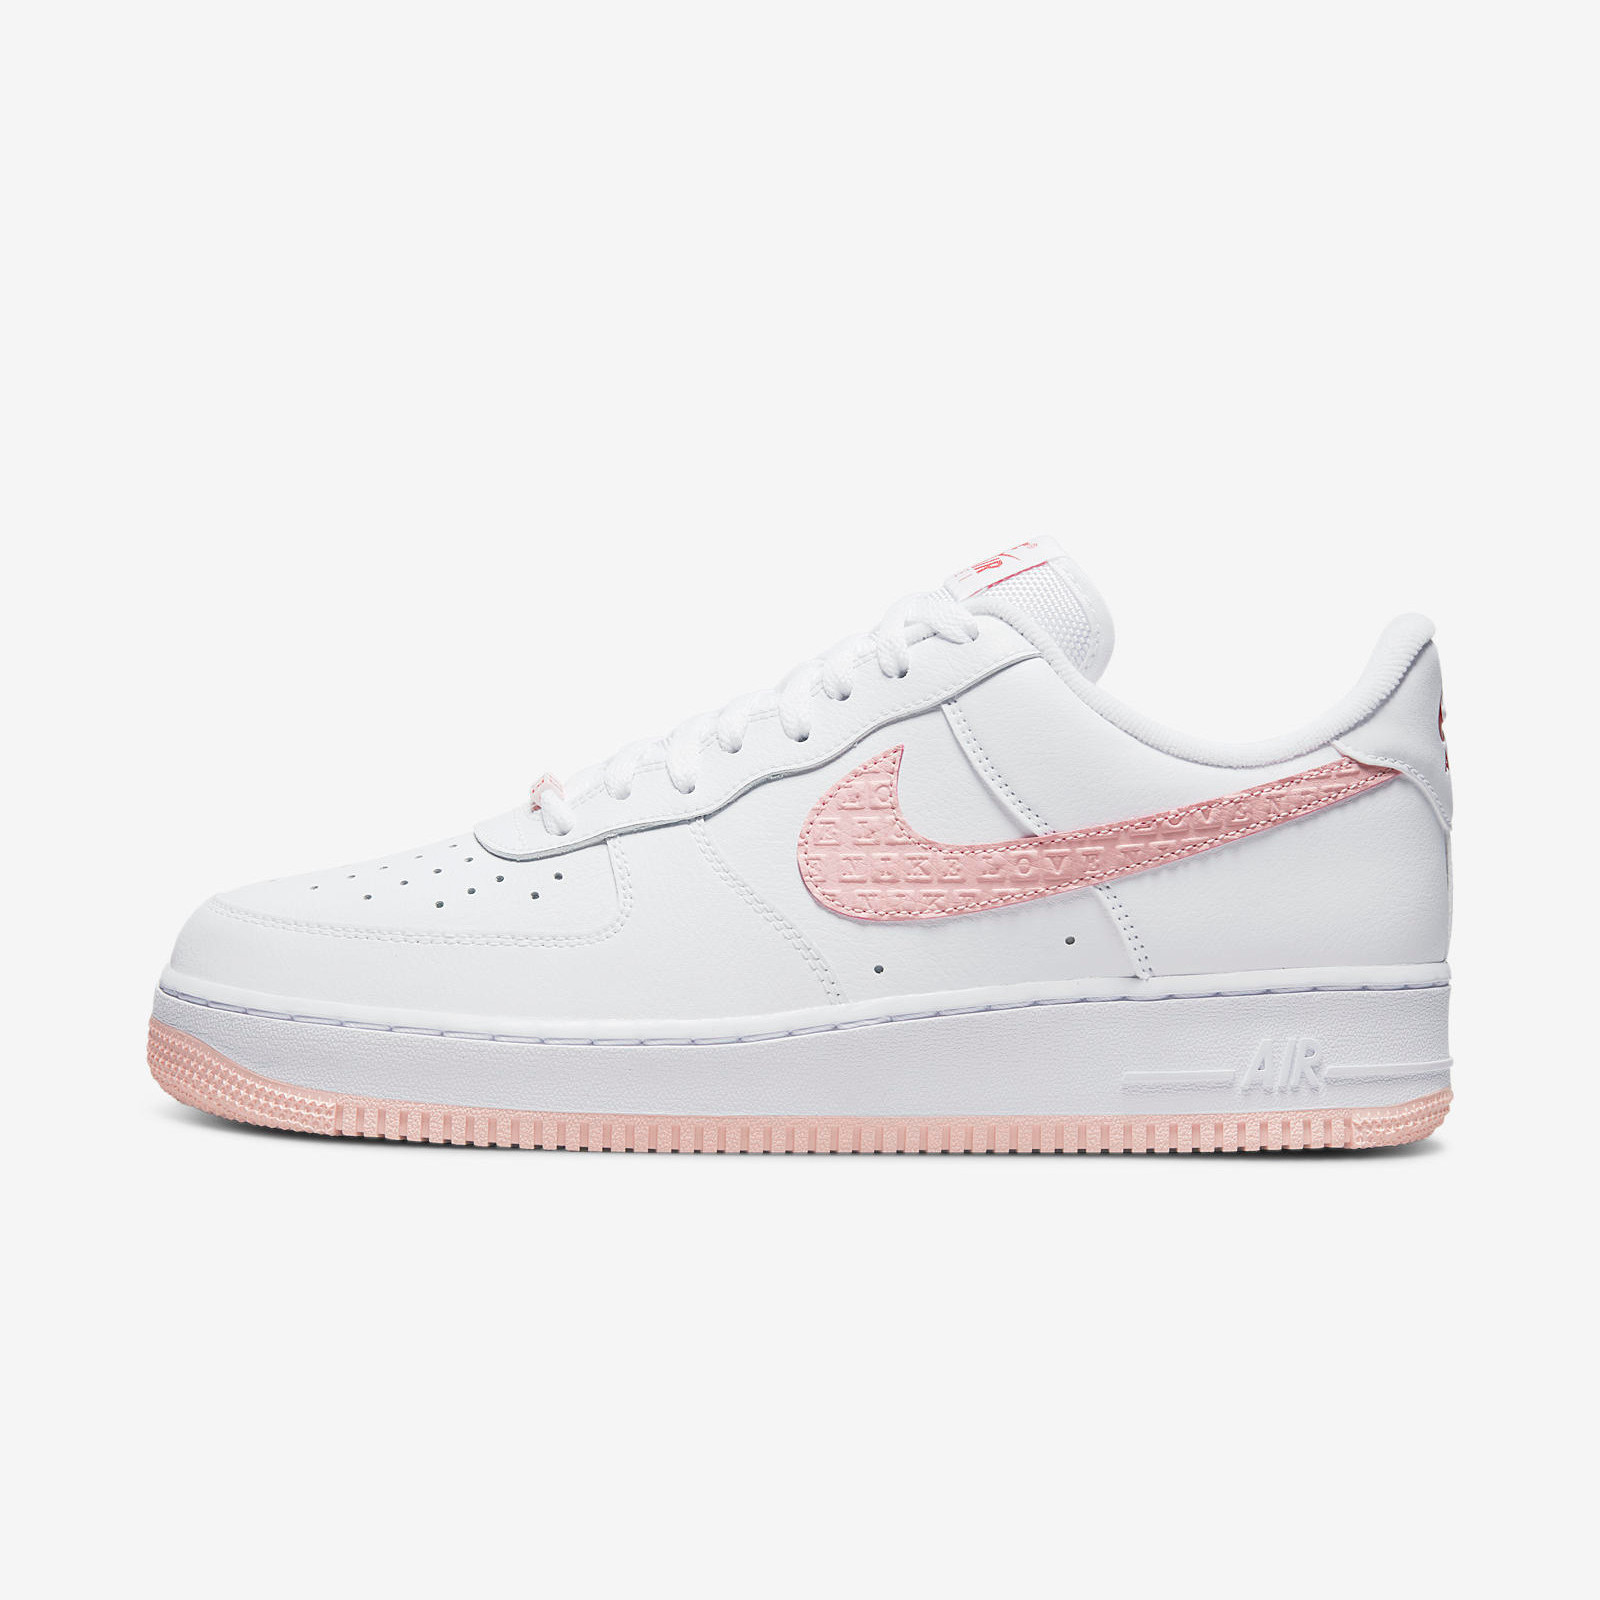 Nike Air Force 1 Low
« Valentines Day »